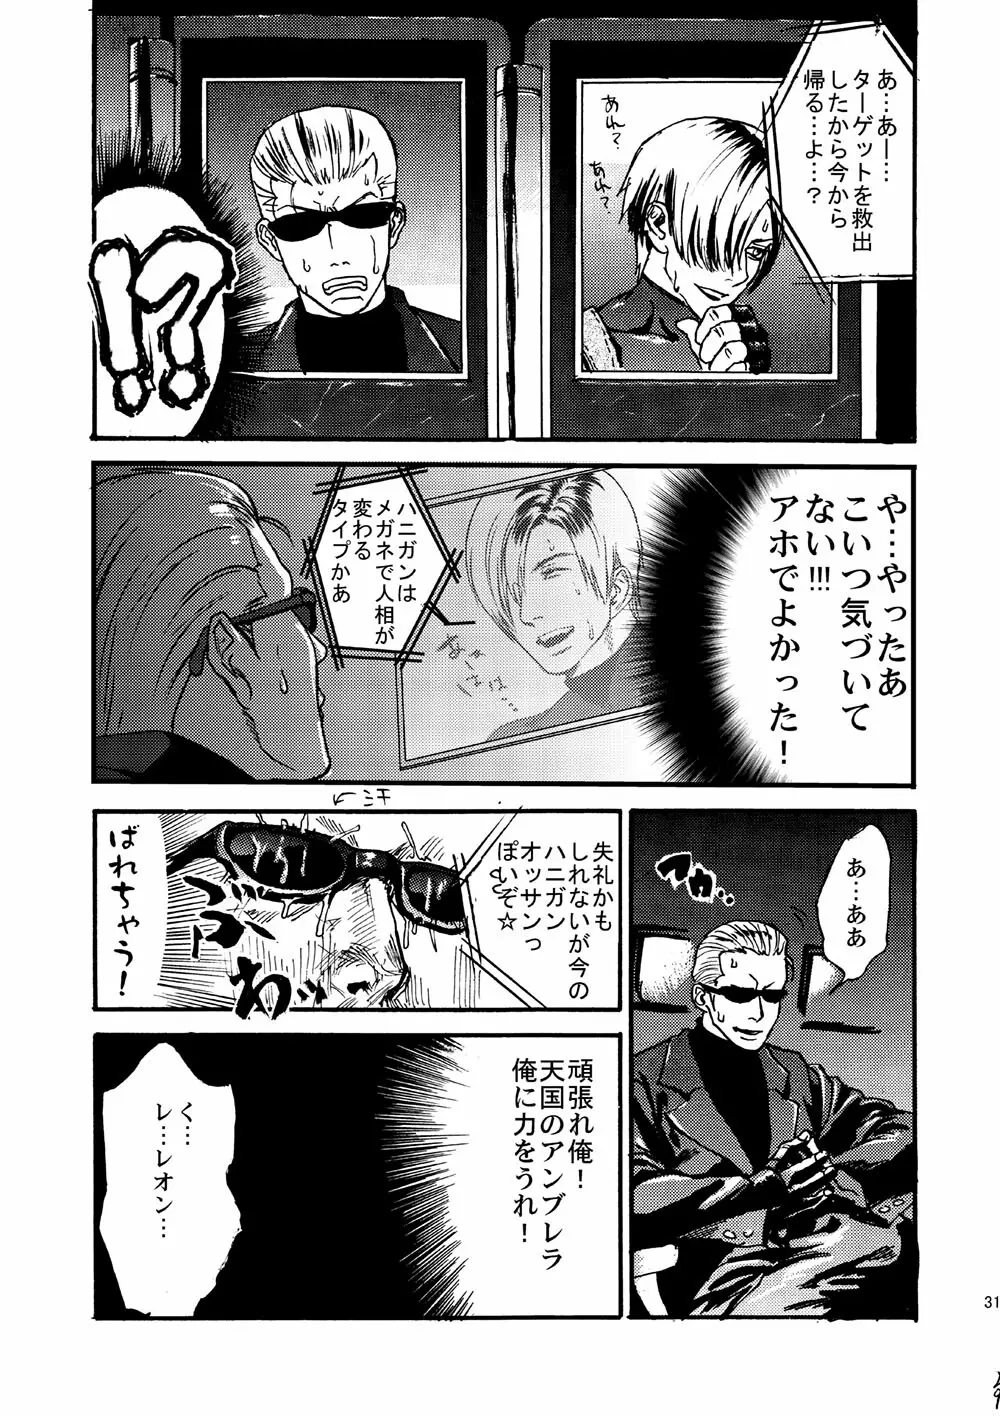 VILLAGE OF FEAR/バイオ４同人誌ｗｅｂ再録 Page.28